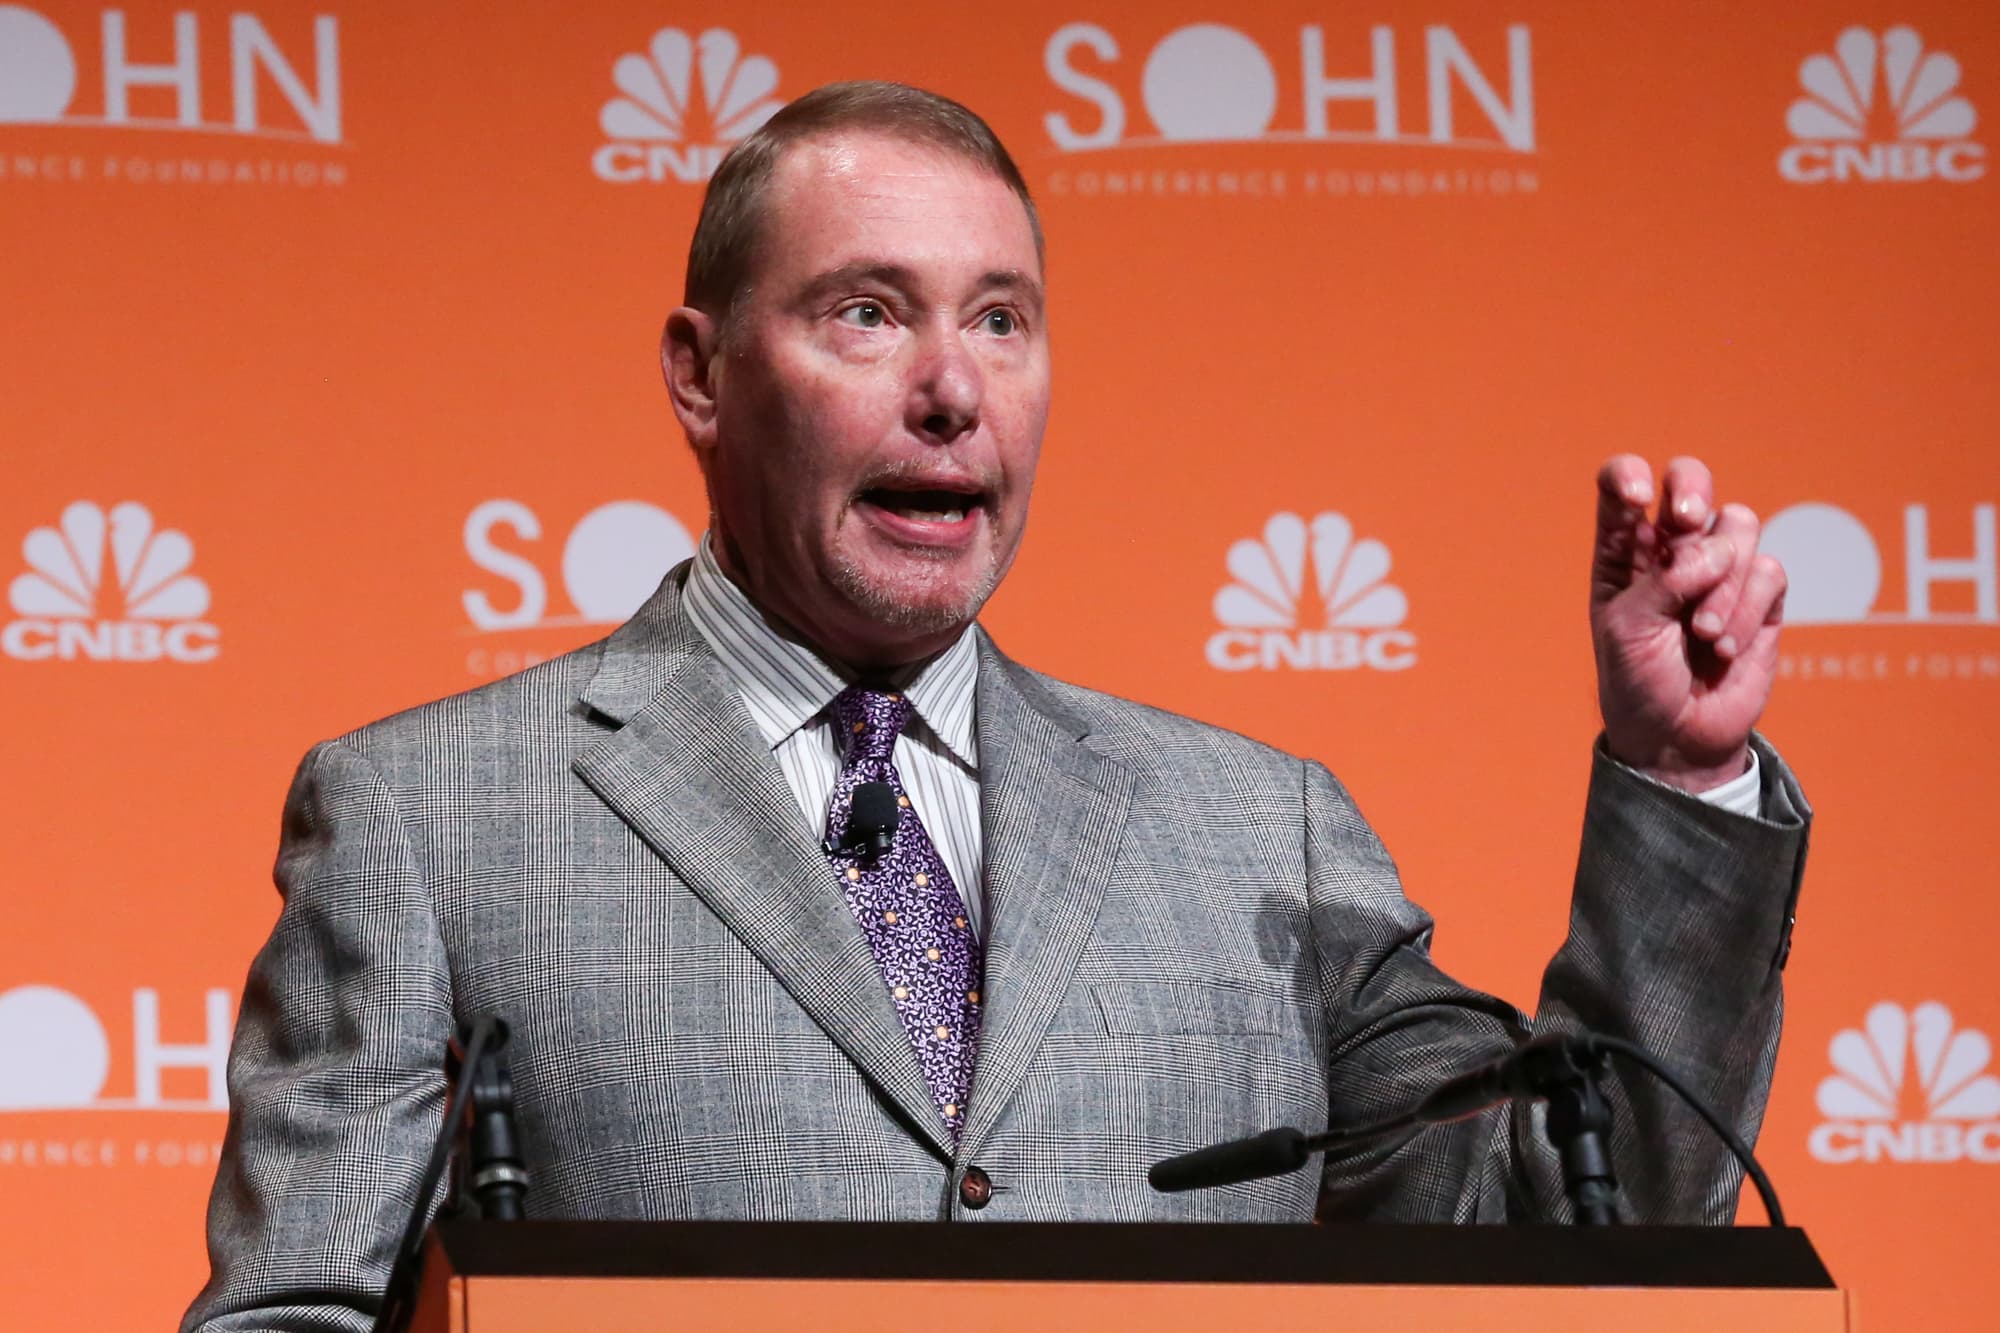 Jeffrey Gundlach says yield curve inversions are 'credible signs of economic distress'